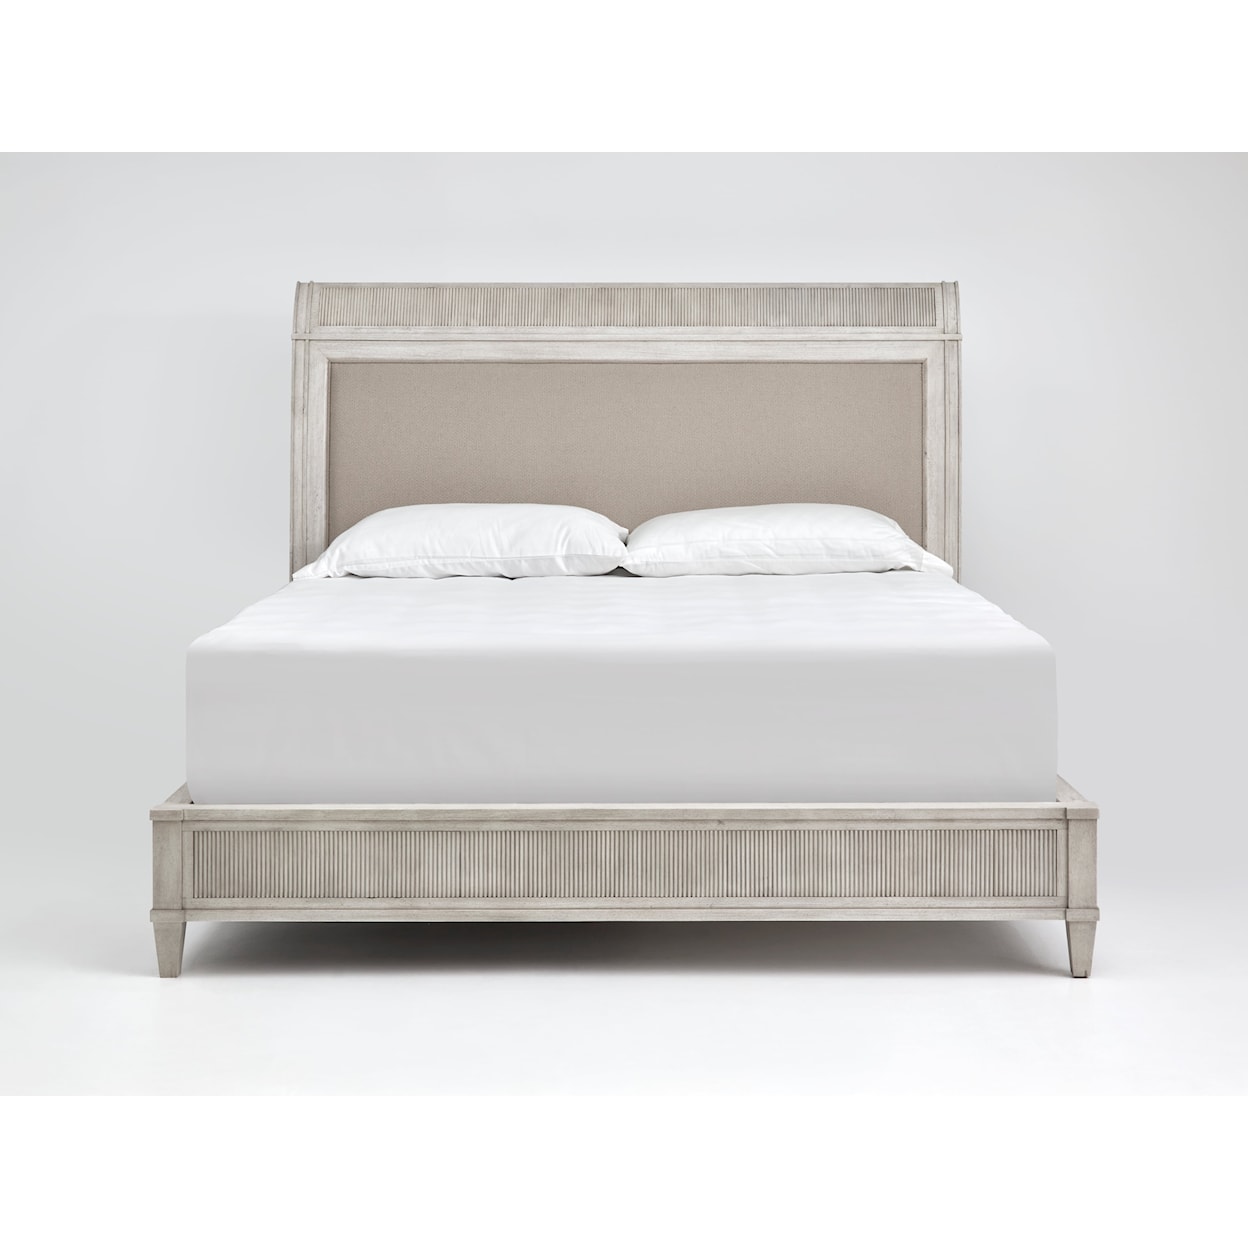 The Preserve Wyngate Queen Bed